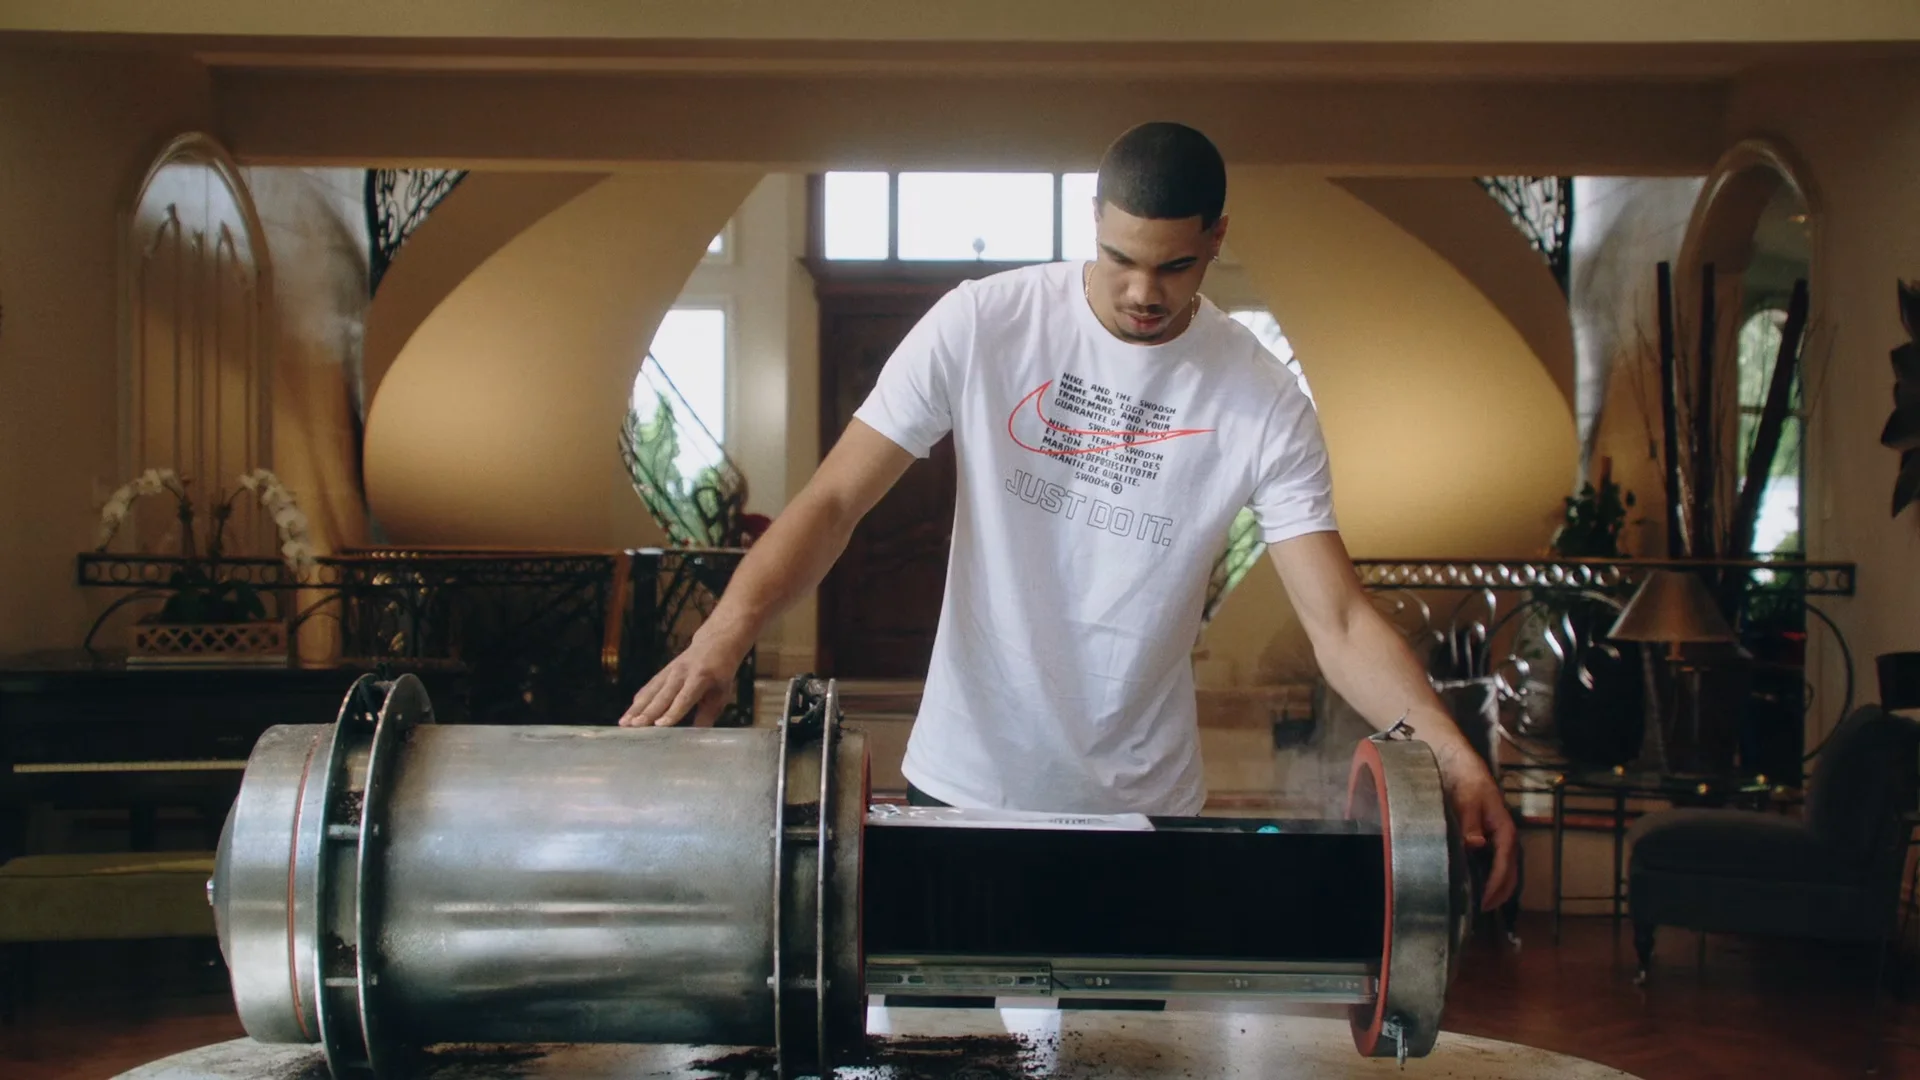 Discover Your Air With Nike, Foot Locker, and Jayson Tatum - WearTesters